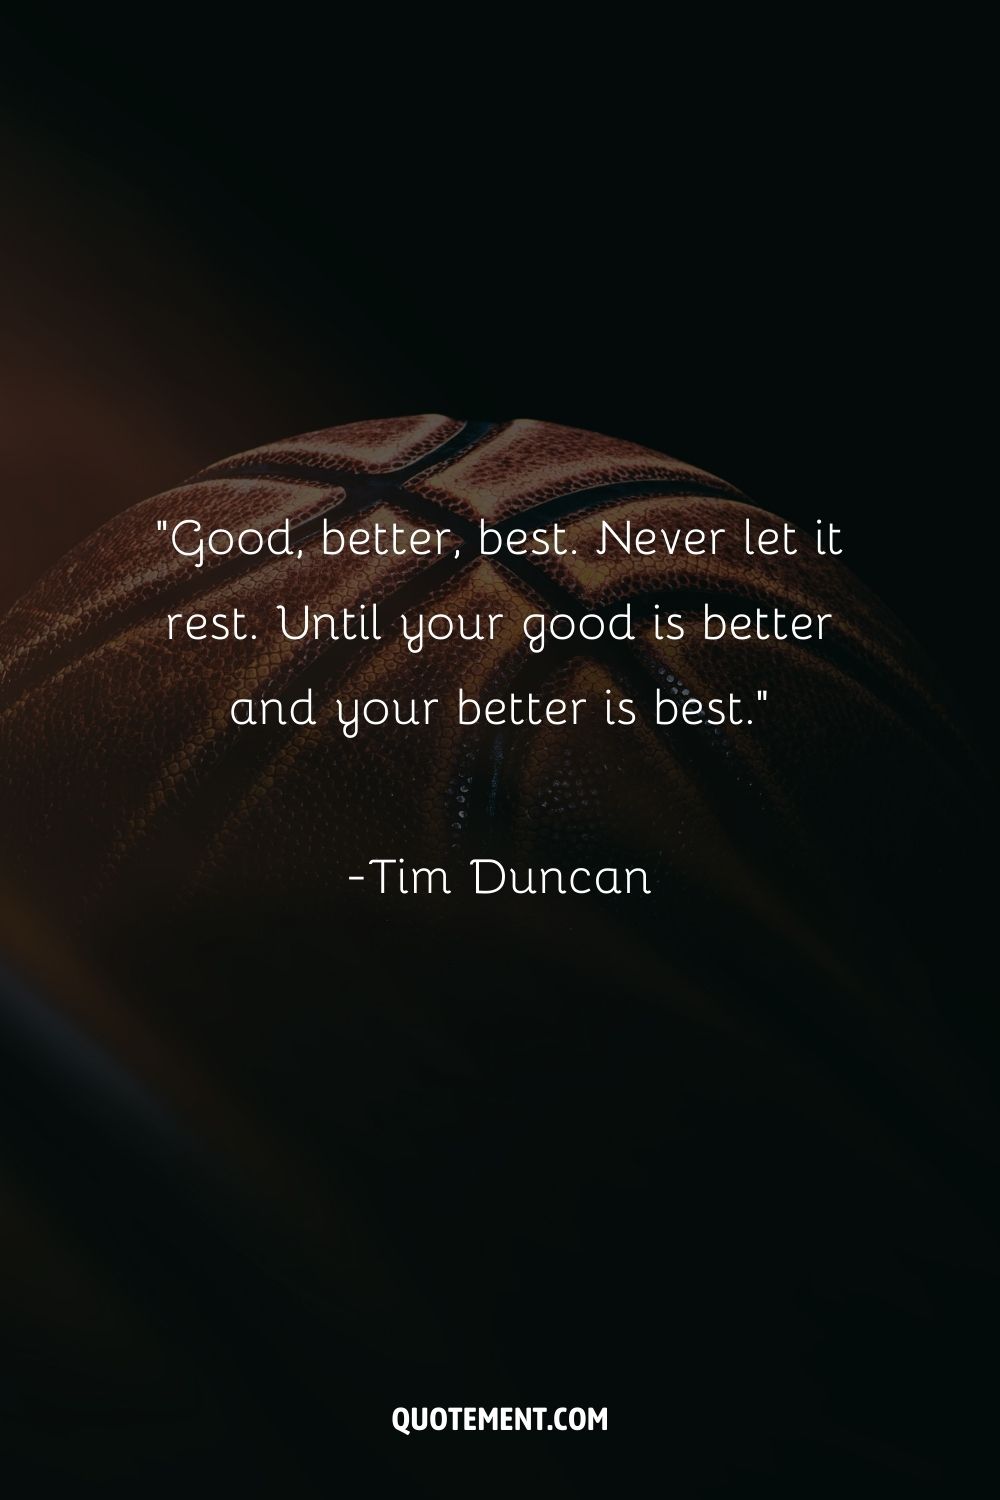 Image of a ball representing basketball inspirational quote.
